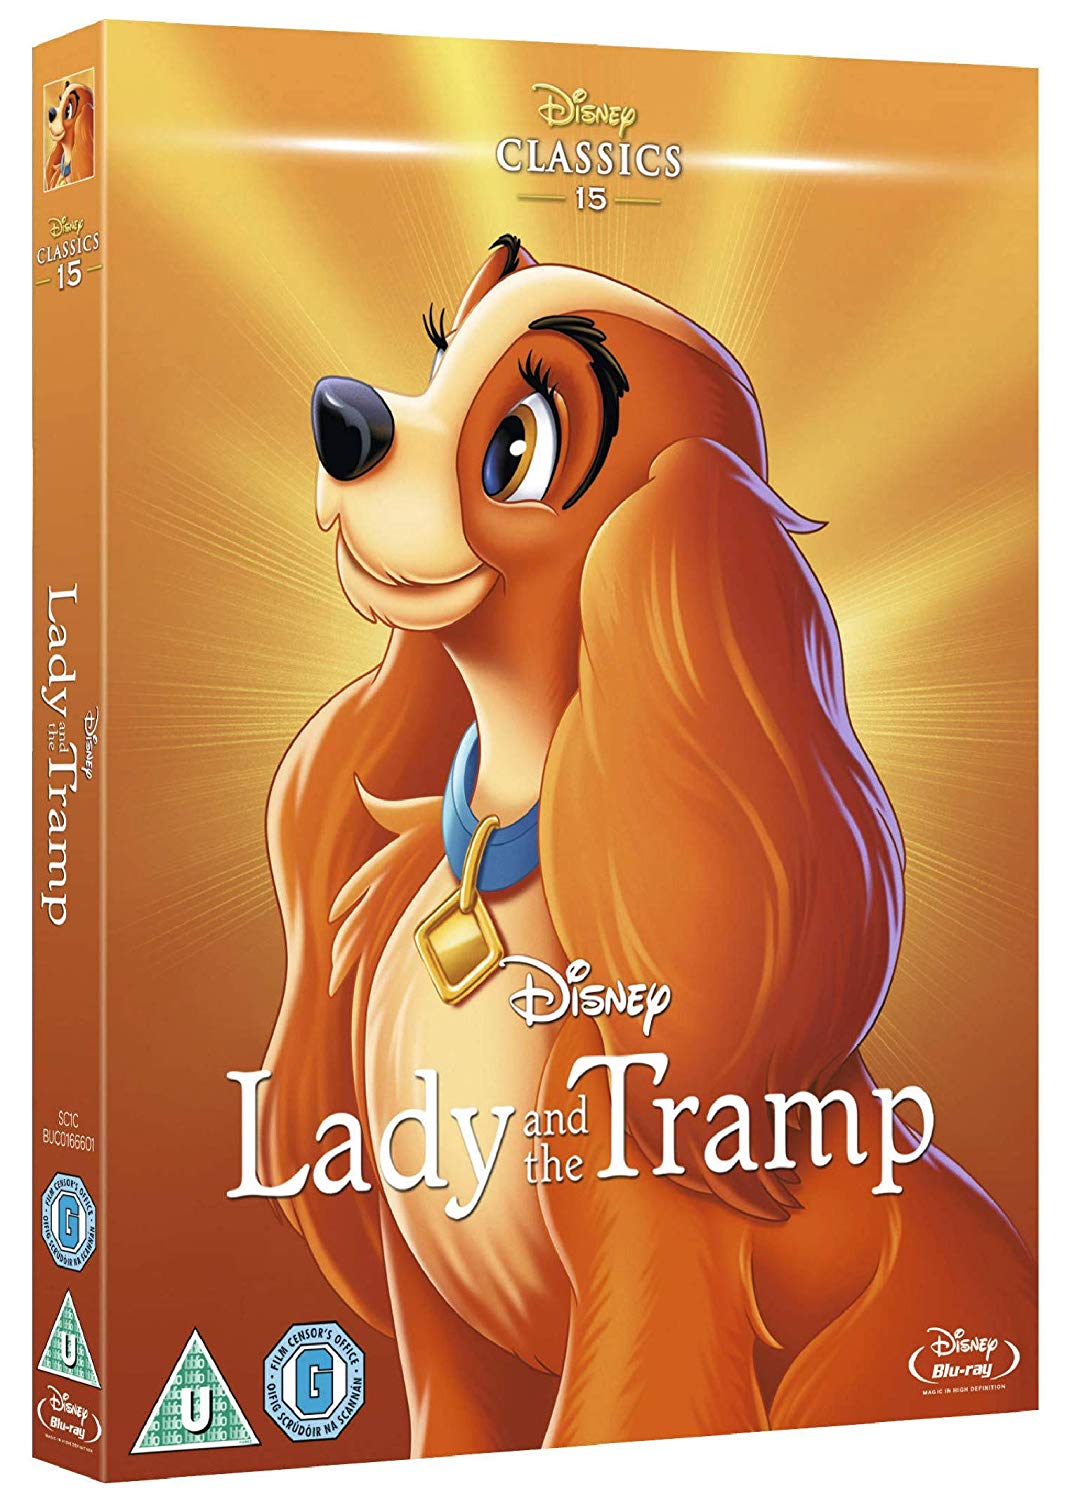 Lady and the Tramp [Blu ray] [UK Import] [Region Free]